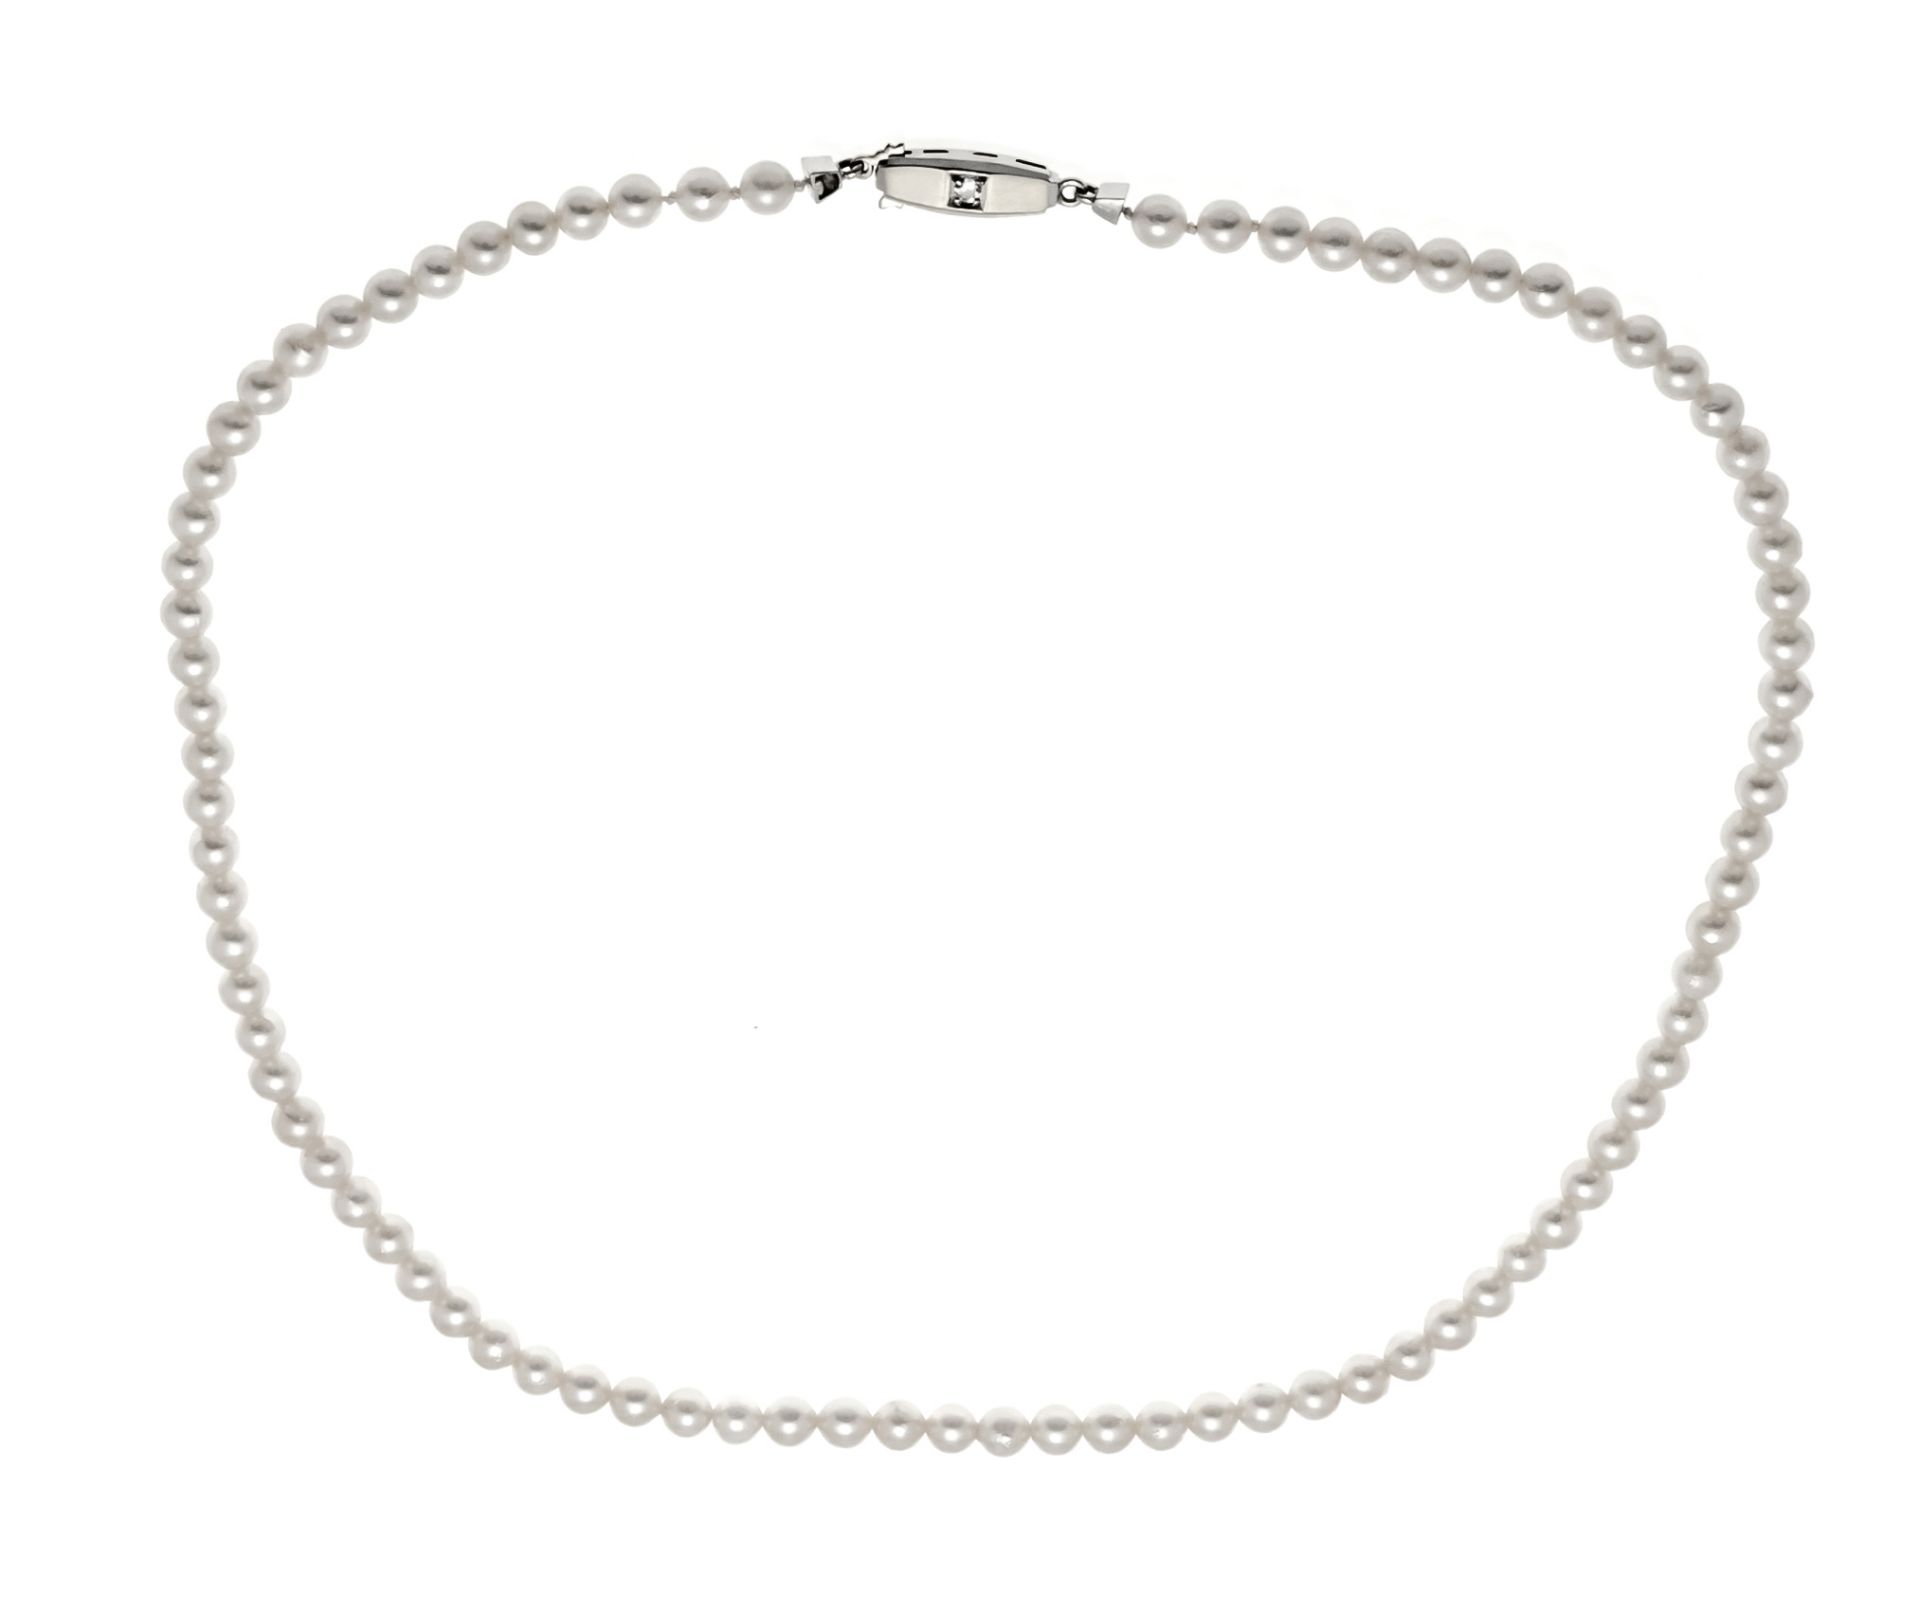 Pearl necklace Juwelier Meier with pin clasp WG 585/000 set with one brilliant-cut diamond 0,03 ct